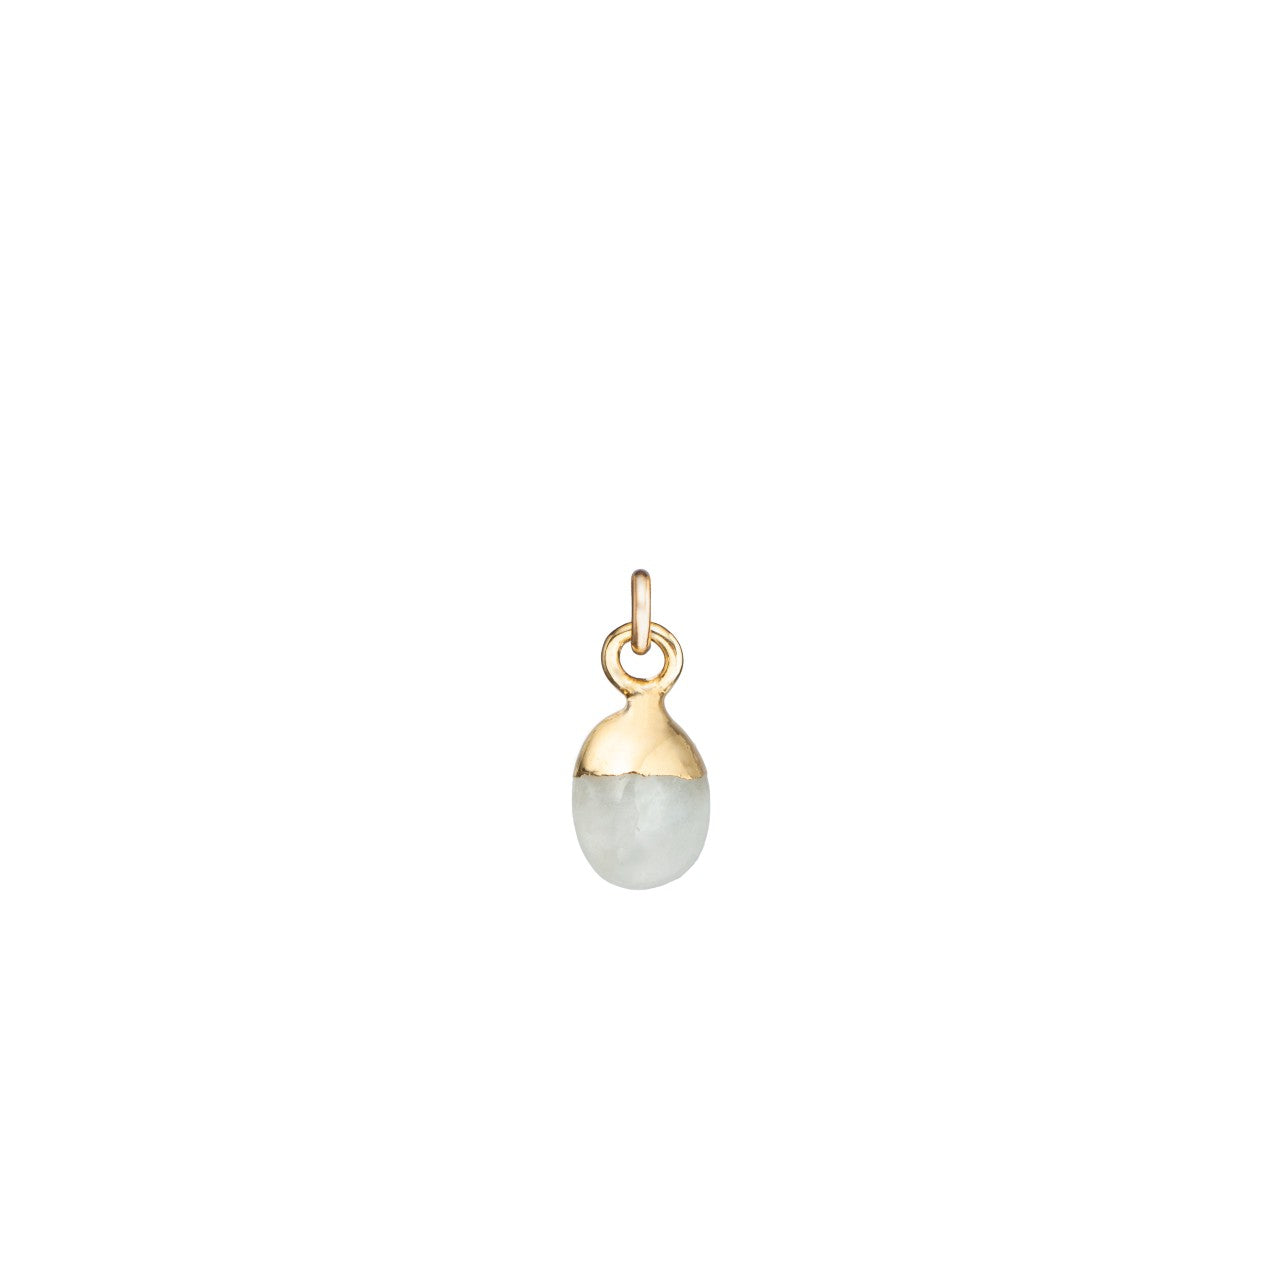 Additional Stone | Tiny Tumbled (Gold Plated)